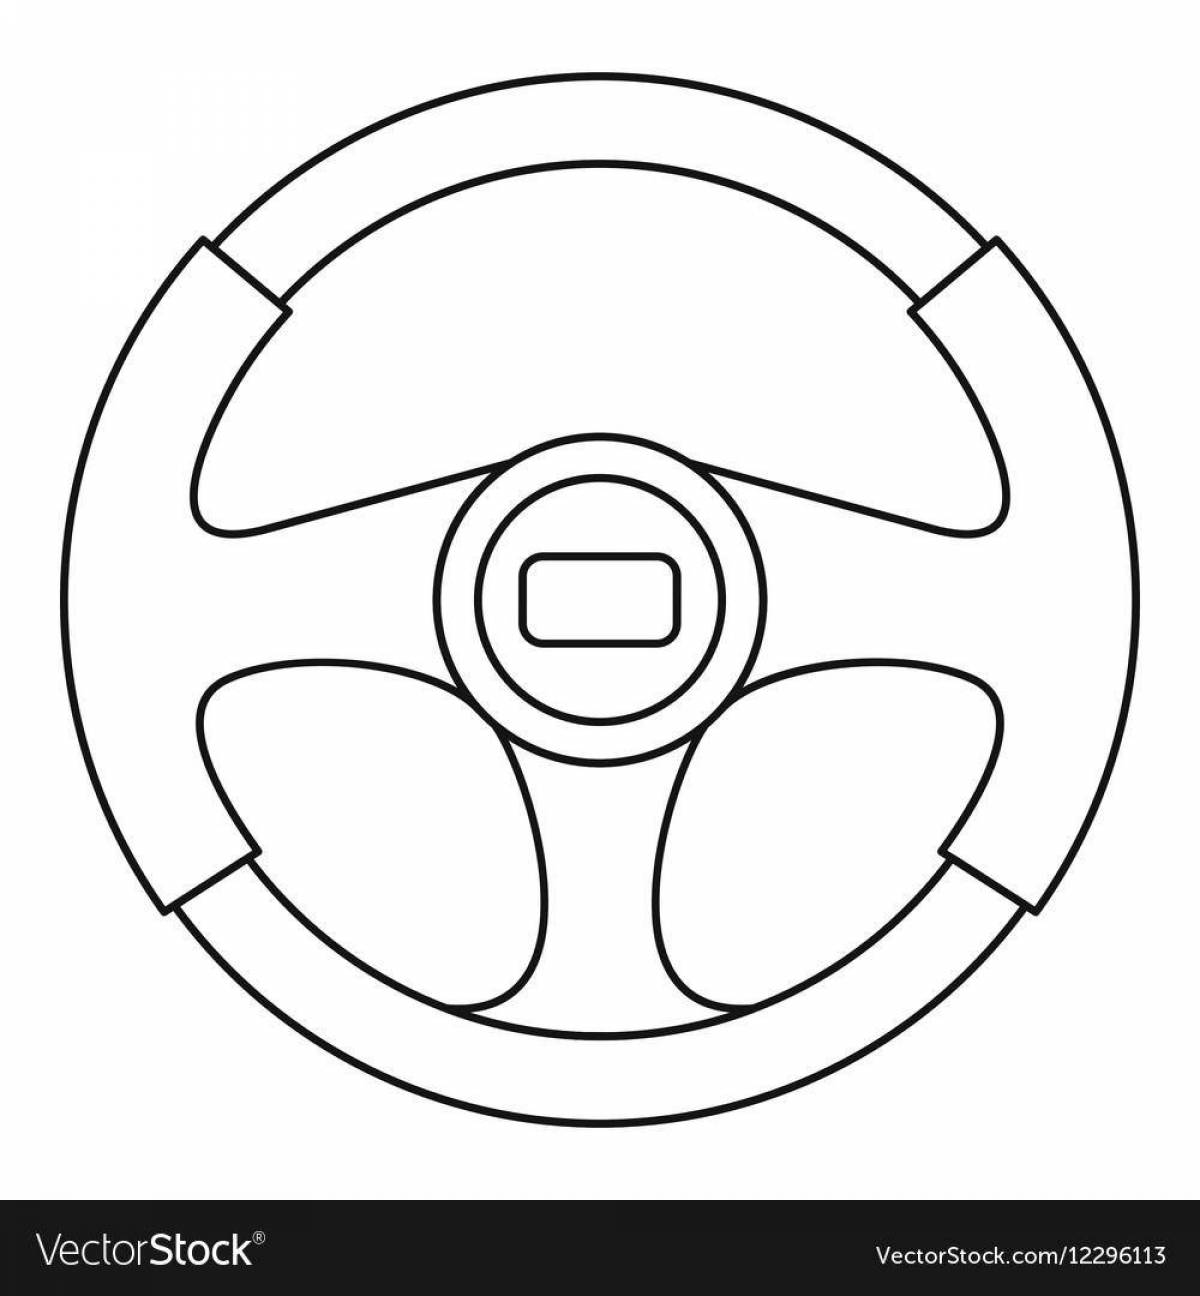 Colorful steering wheel coloring page